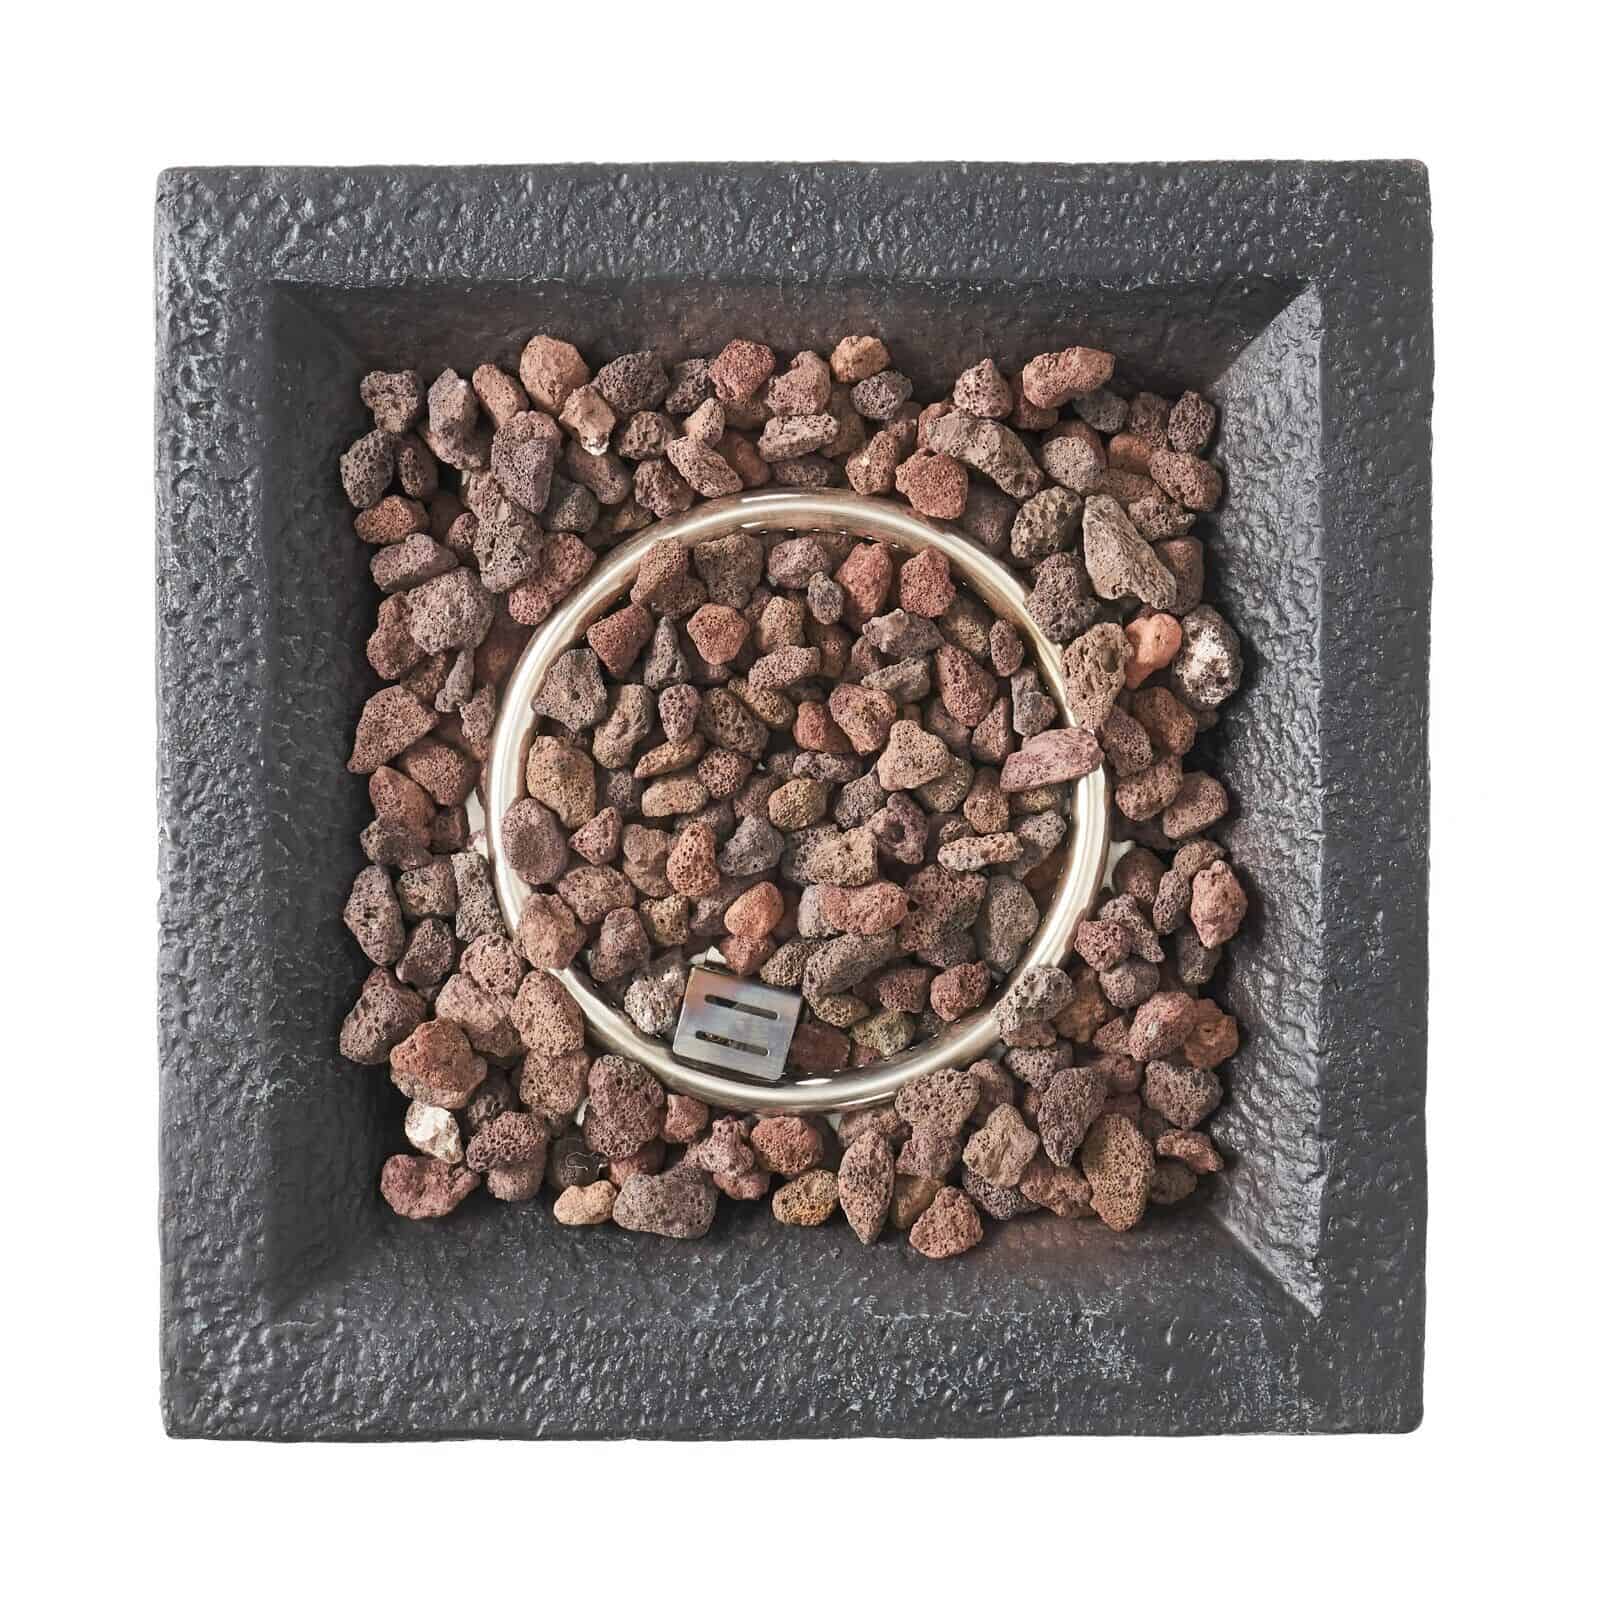 A bangle with stones in a black box.